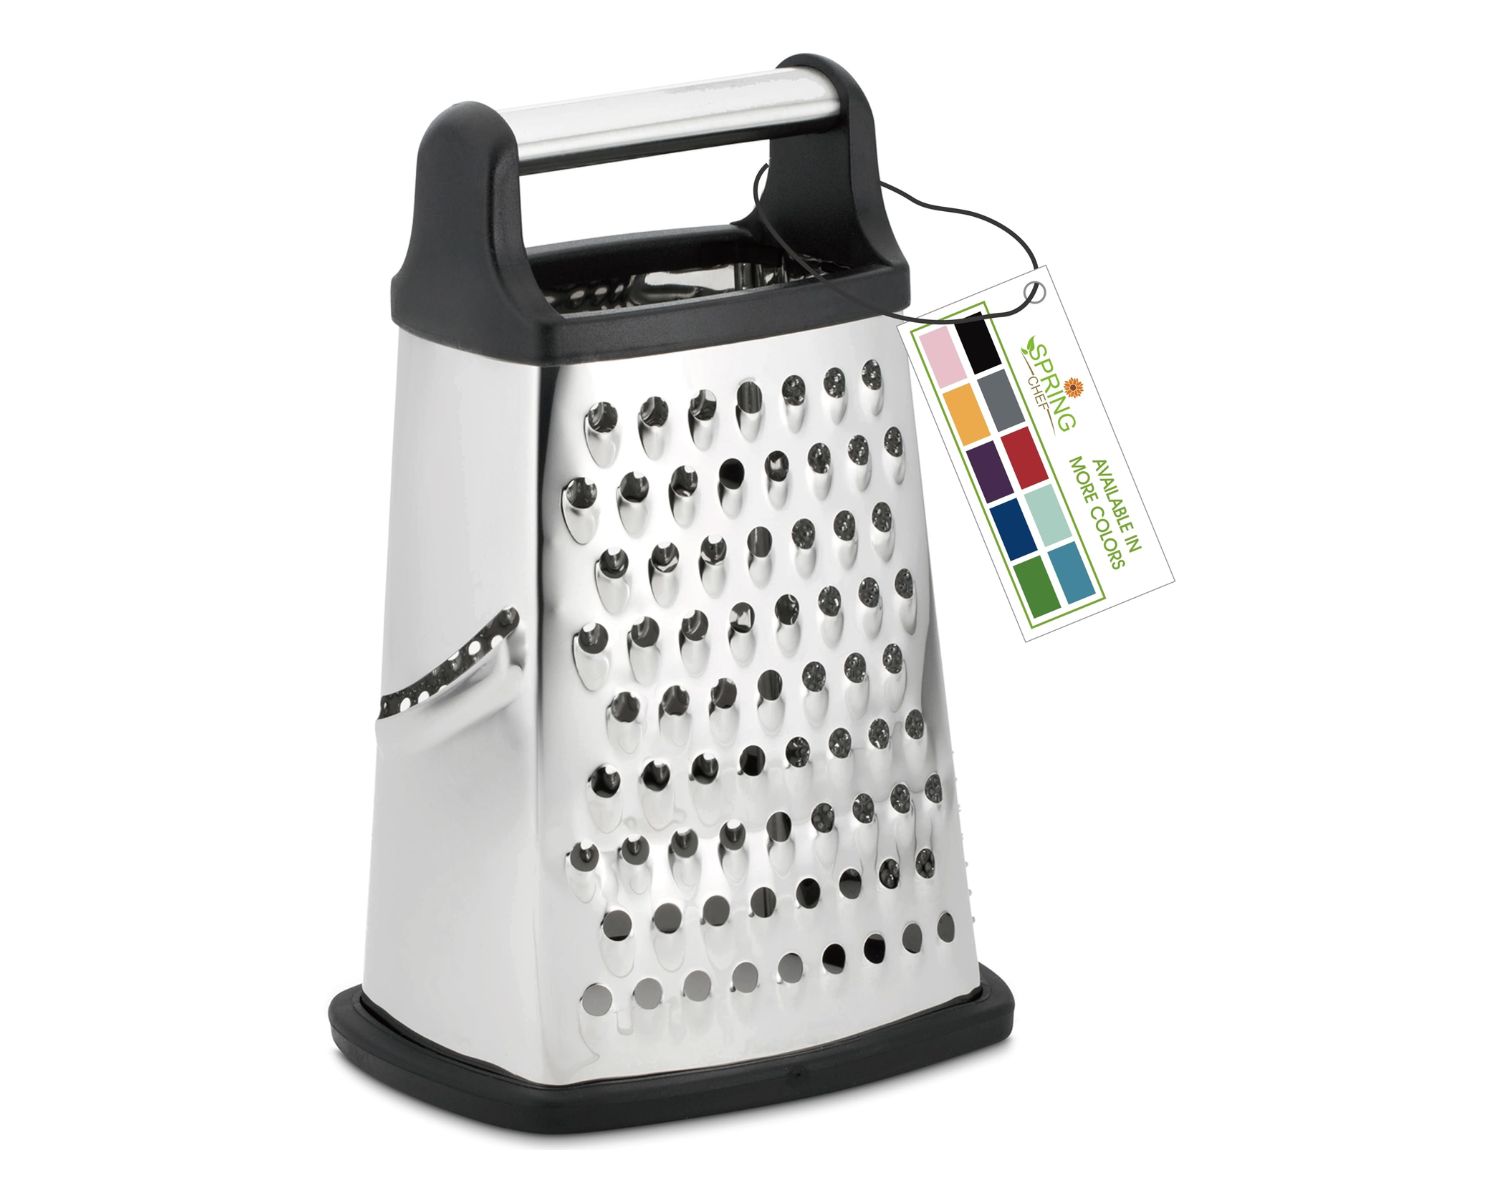 Cheese Grater Review: The Best Options for Effortless Grating